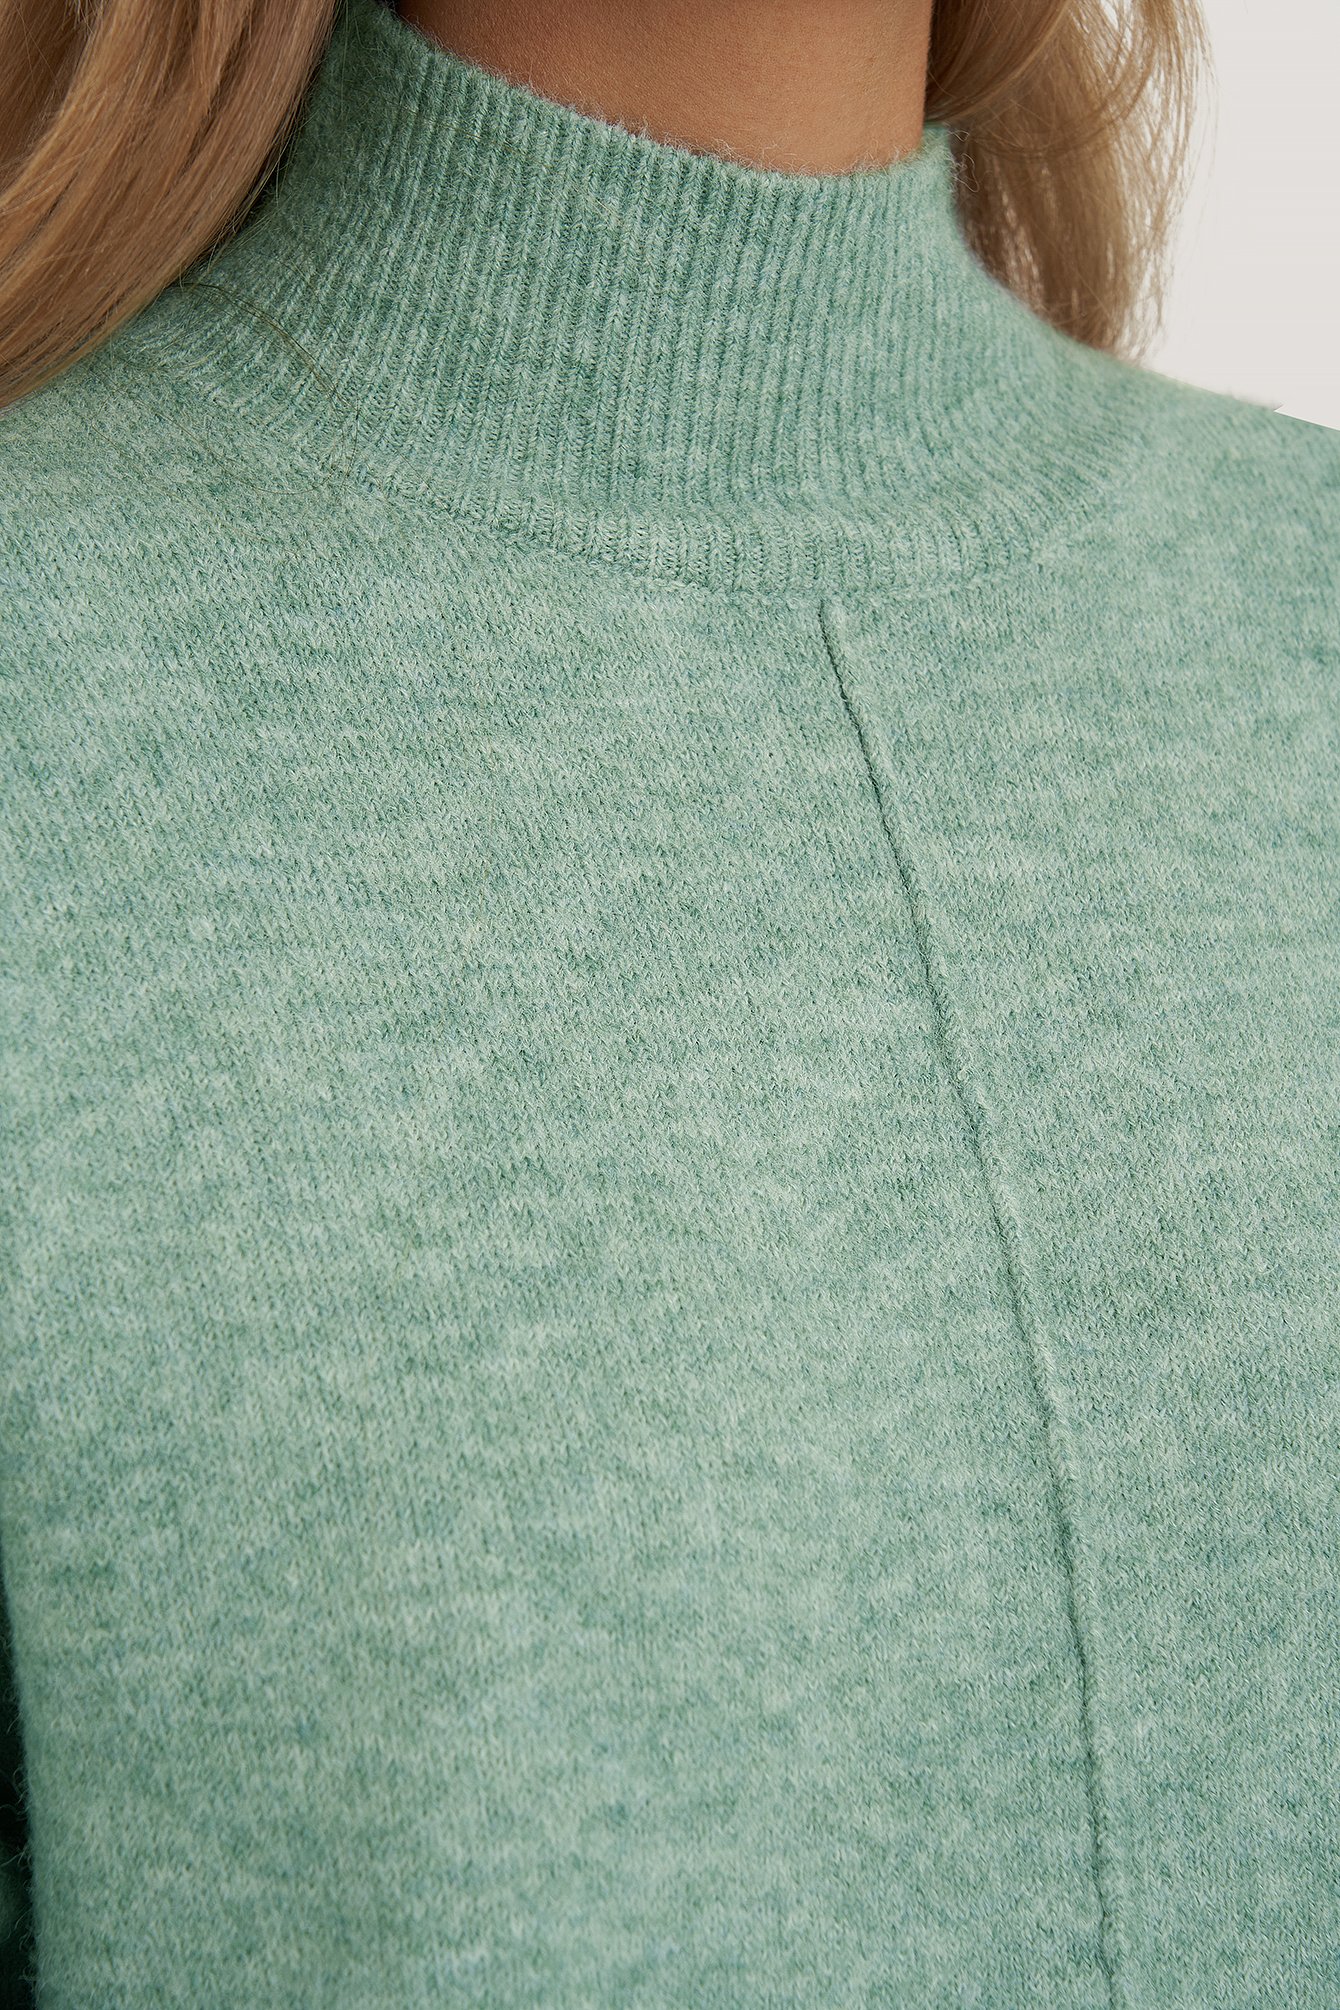 Green High Neck Dropped Shoulder Knitted Sweater